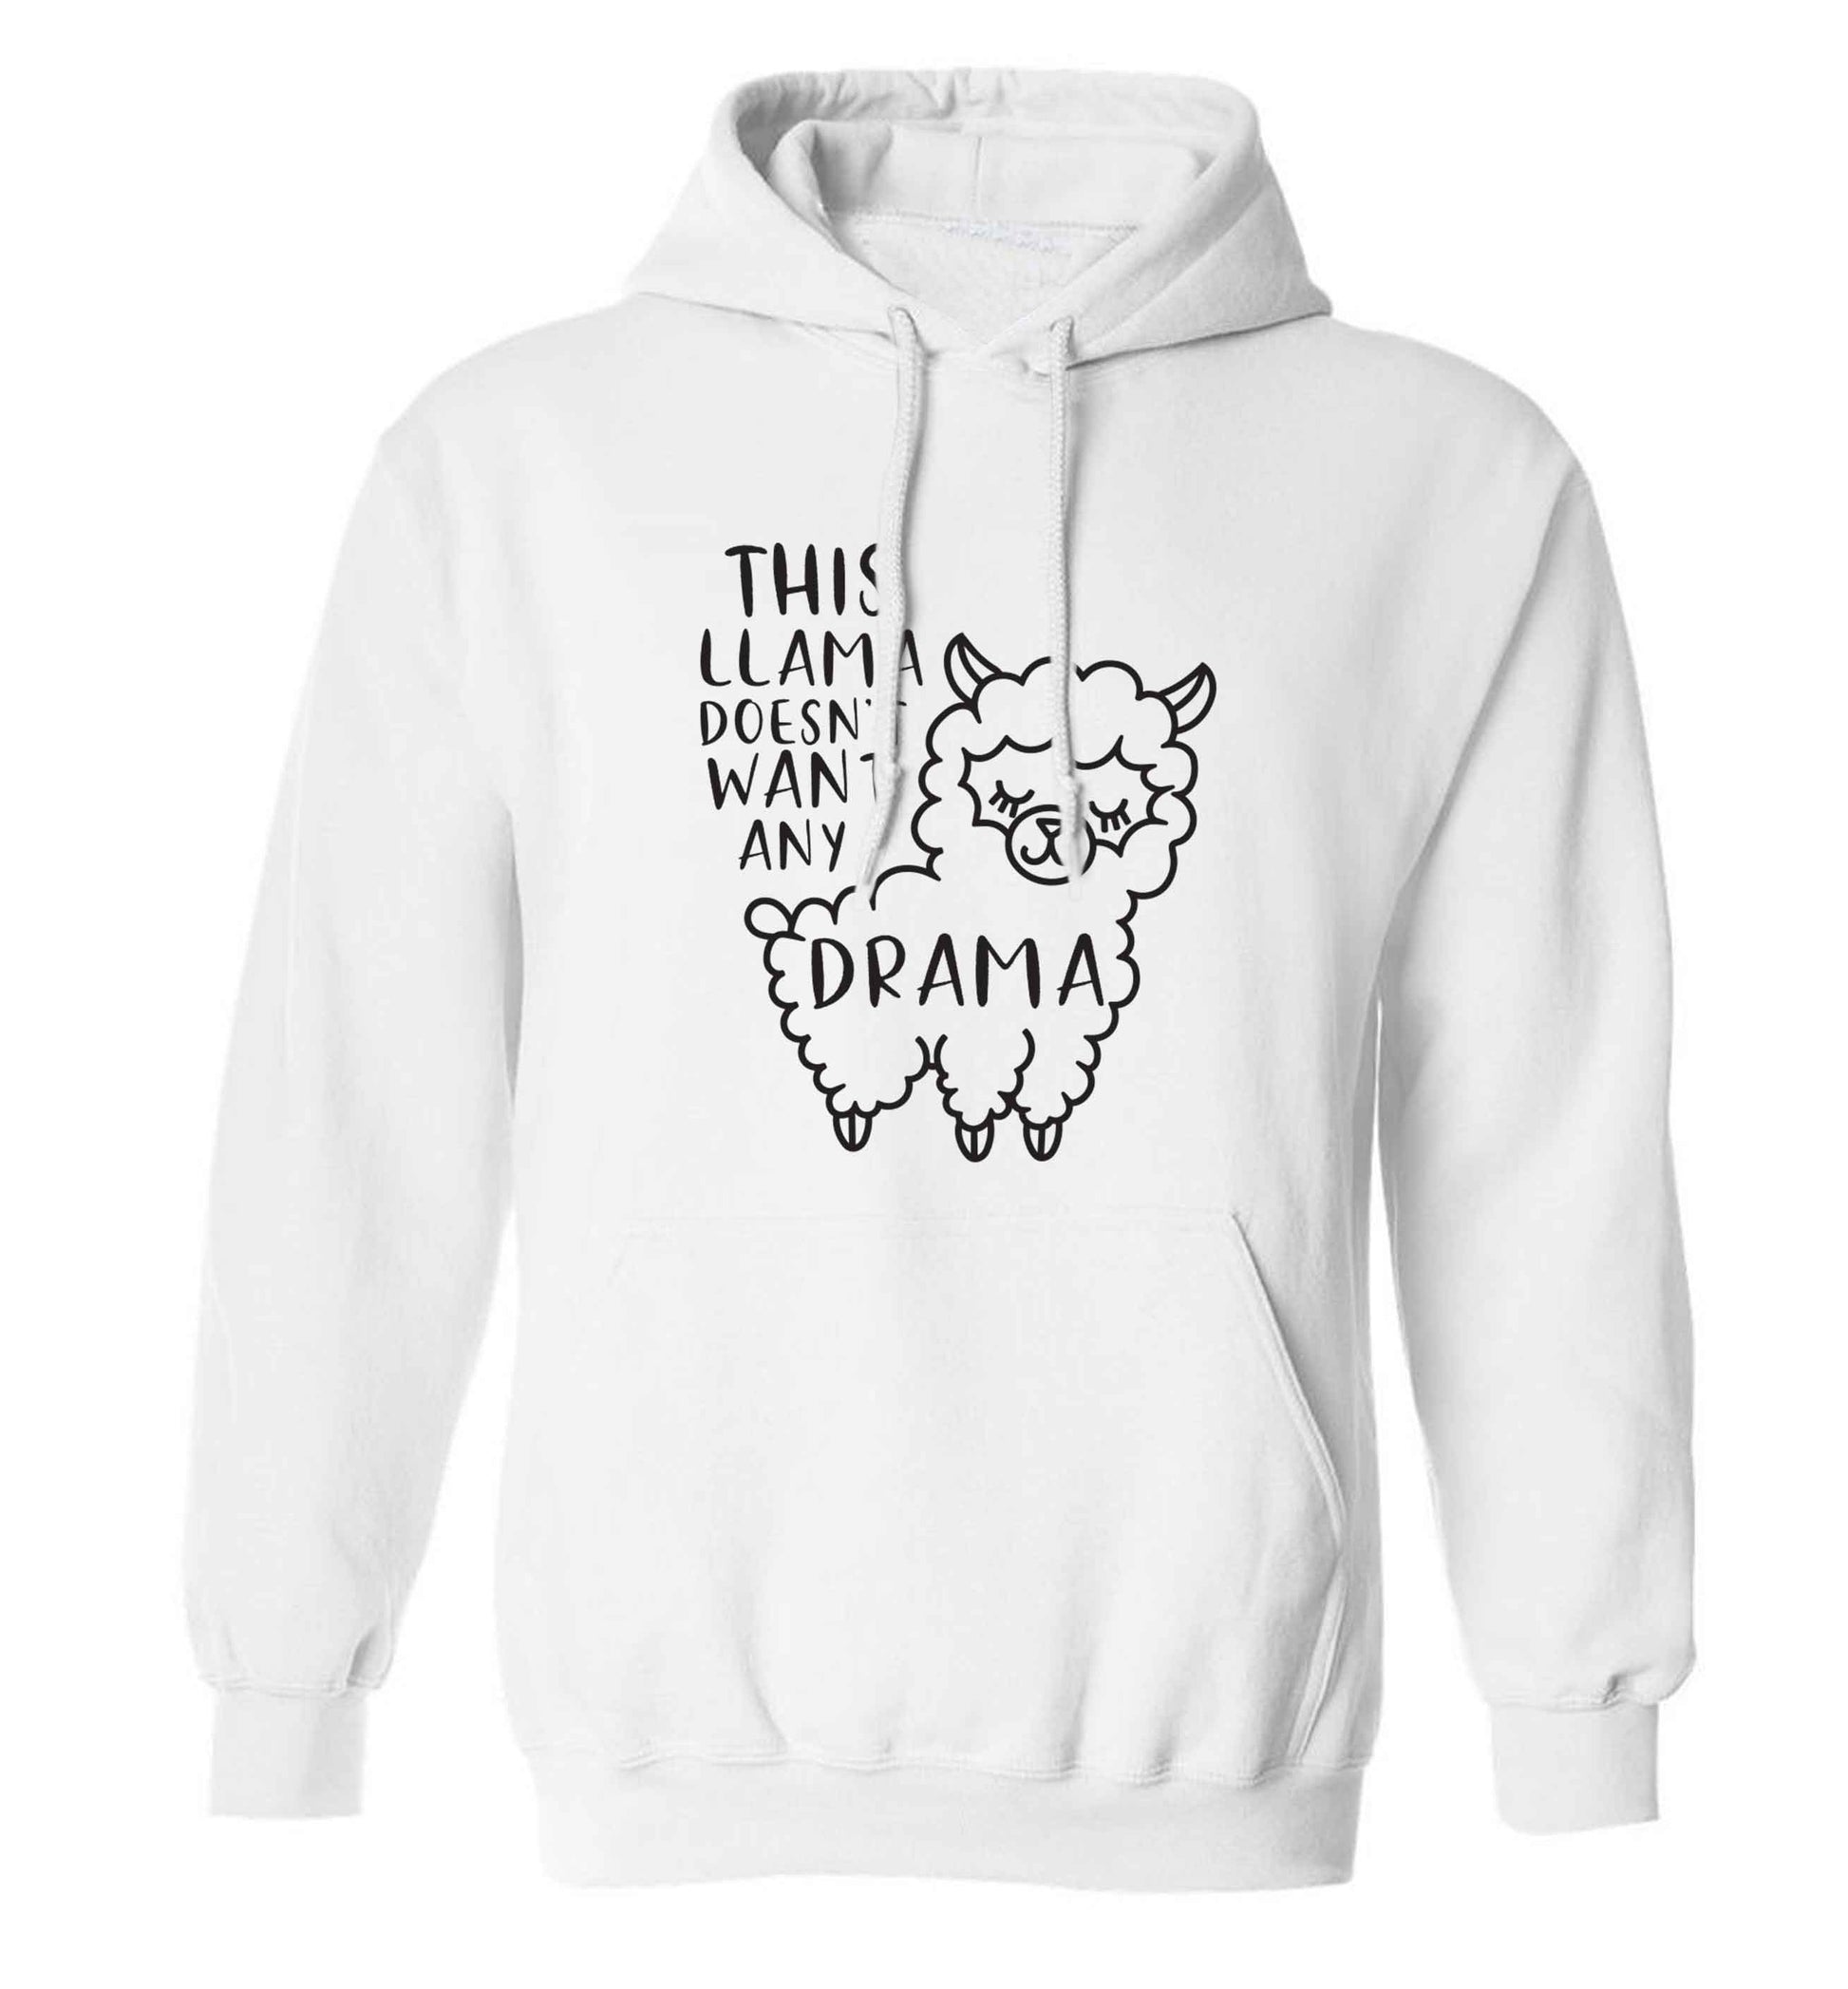 This Llama doesn't want any drama adults unisex white hoodie 2XL